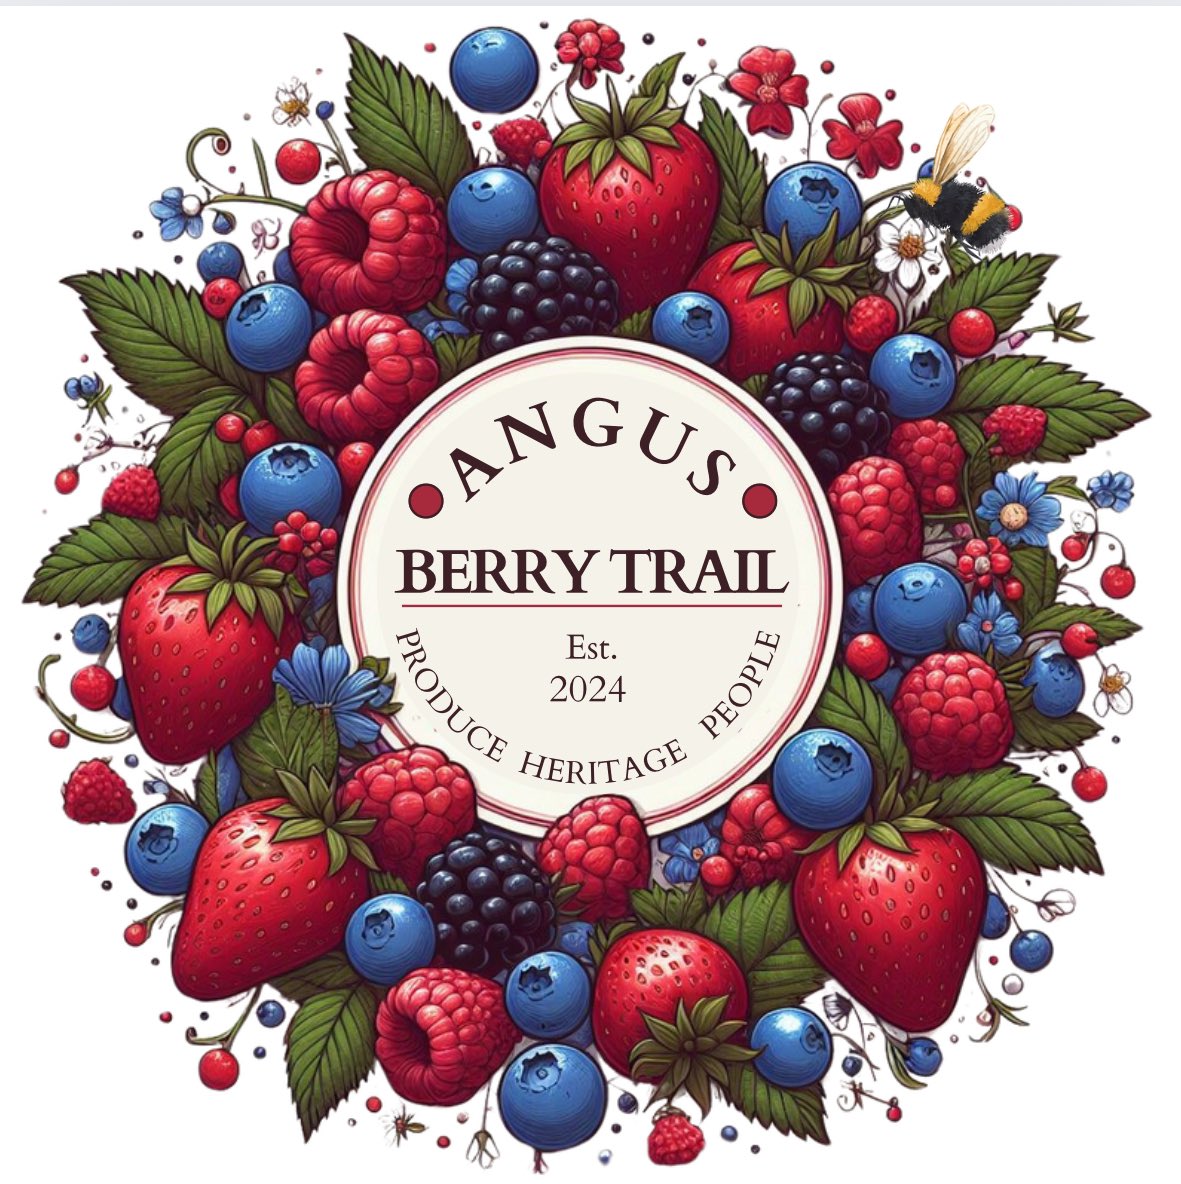 Our new Angus Berry Trail has launched, to mark the start of the strawberry season. Over the summer, we’ll be exploring all about the produce, heritage, and people of the soft fruit industry here in Angus. @scotfooddrink #regionalfoodfund